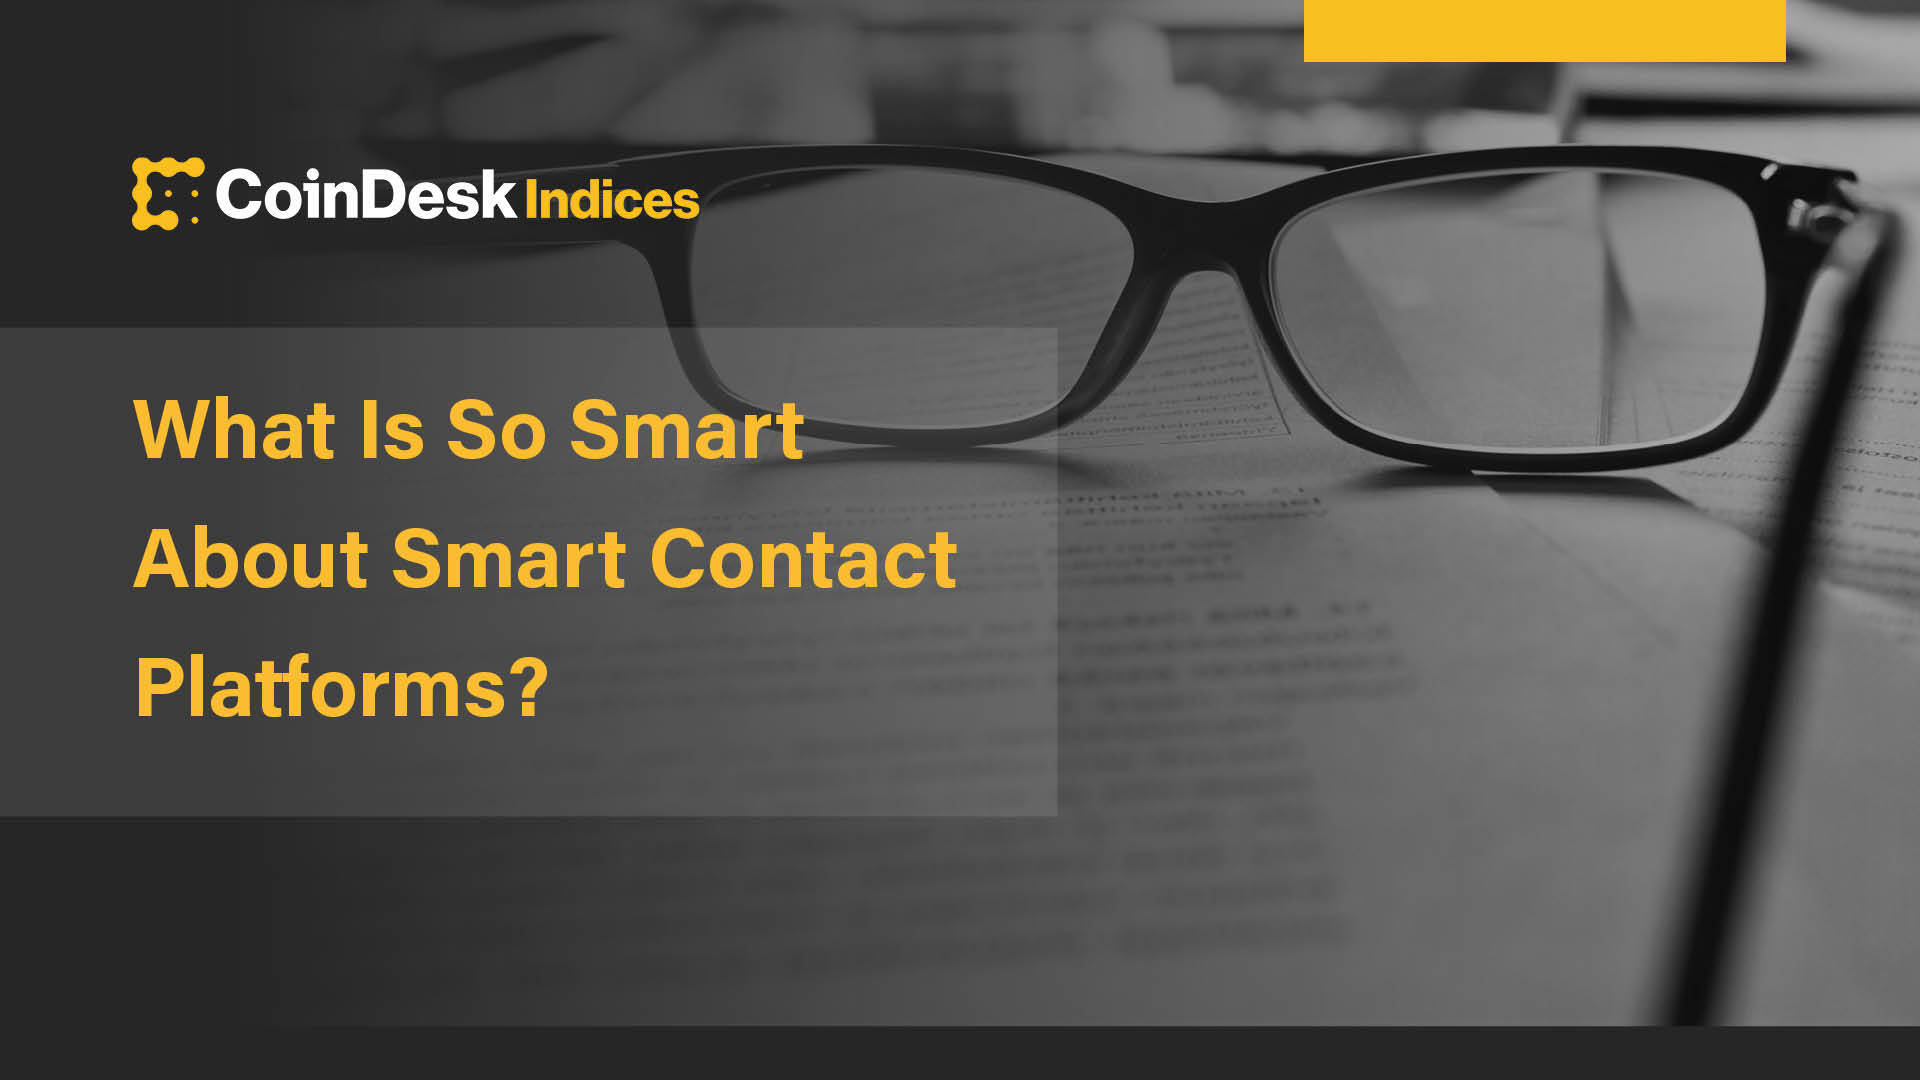 What Is So Smart About Smart Contract Platforms?